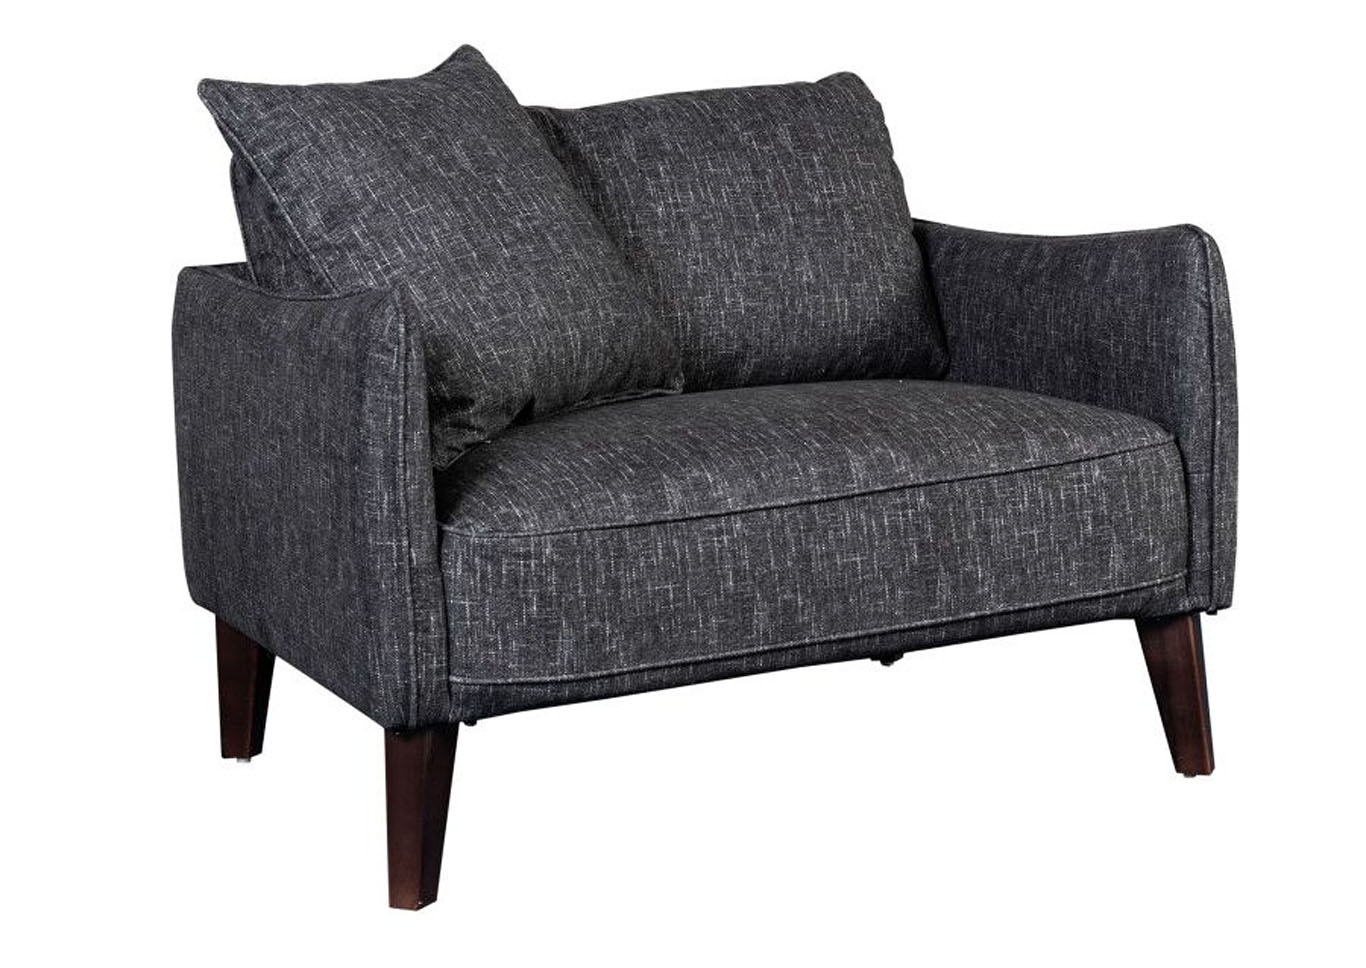 Asher Sofa and Chair Set,Instore